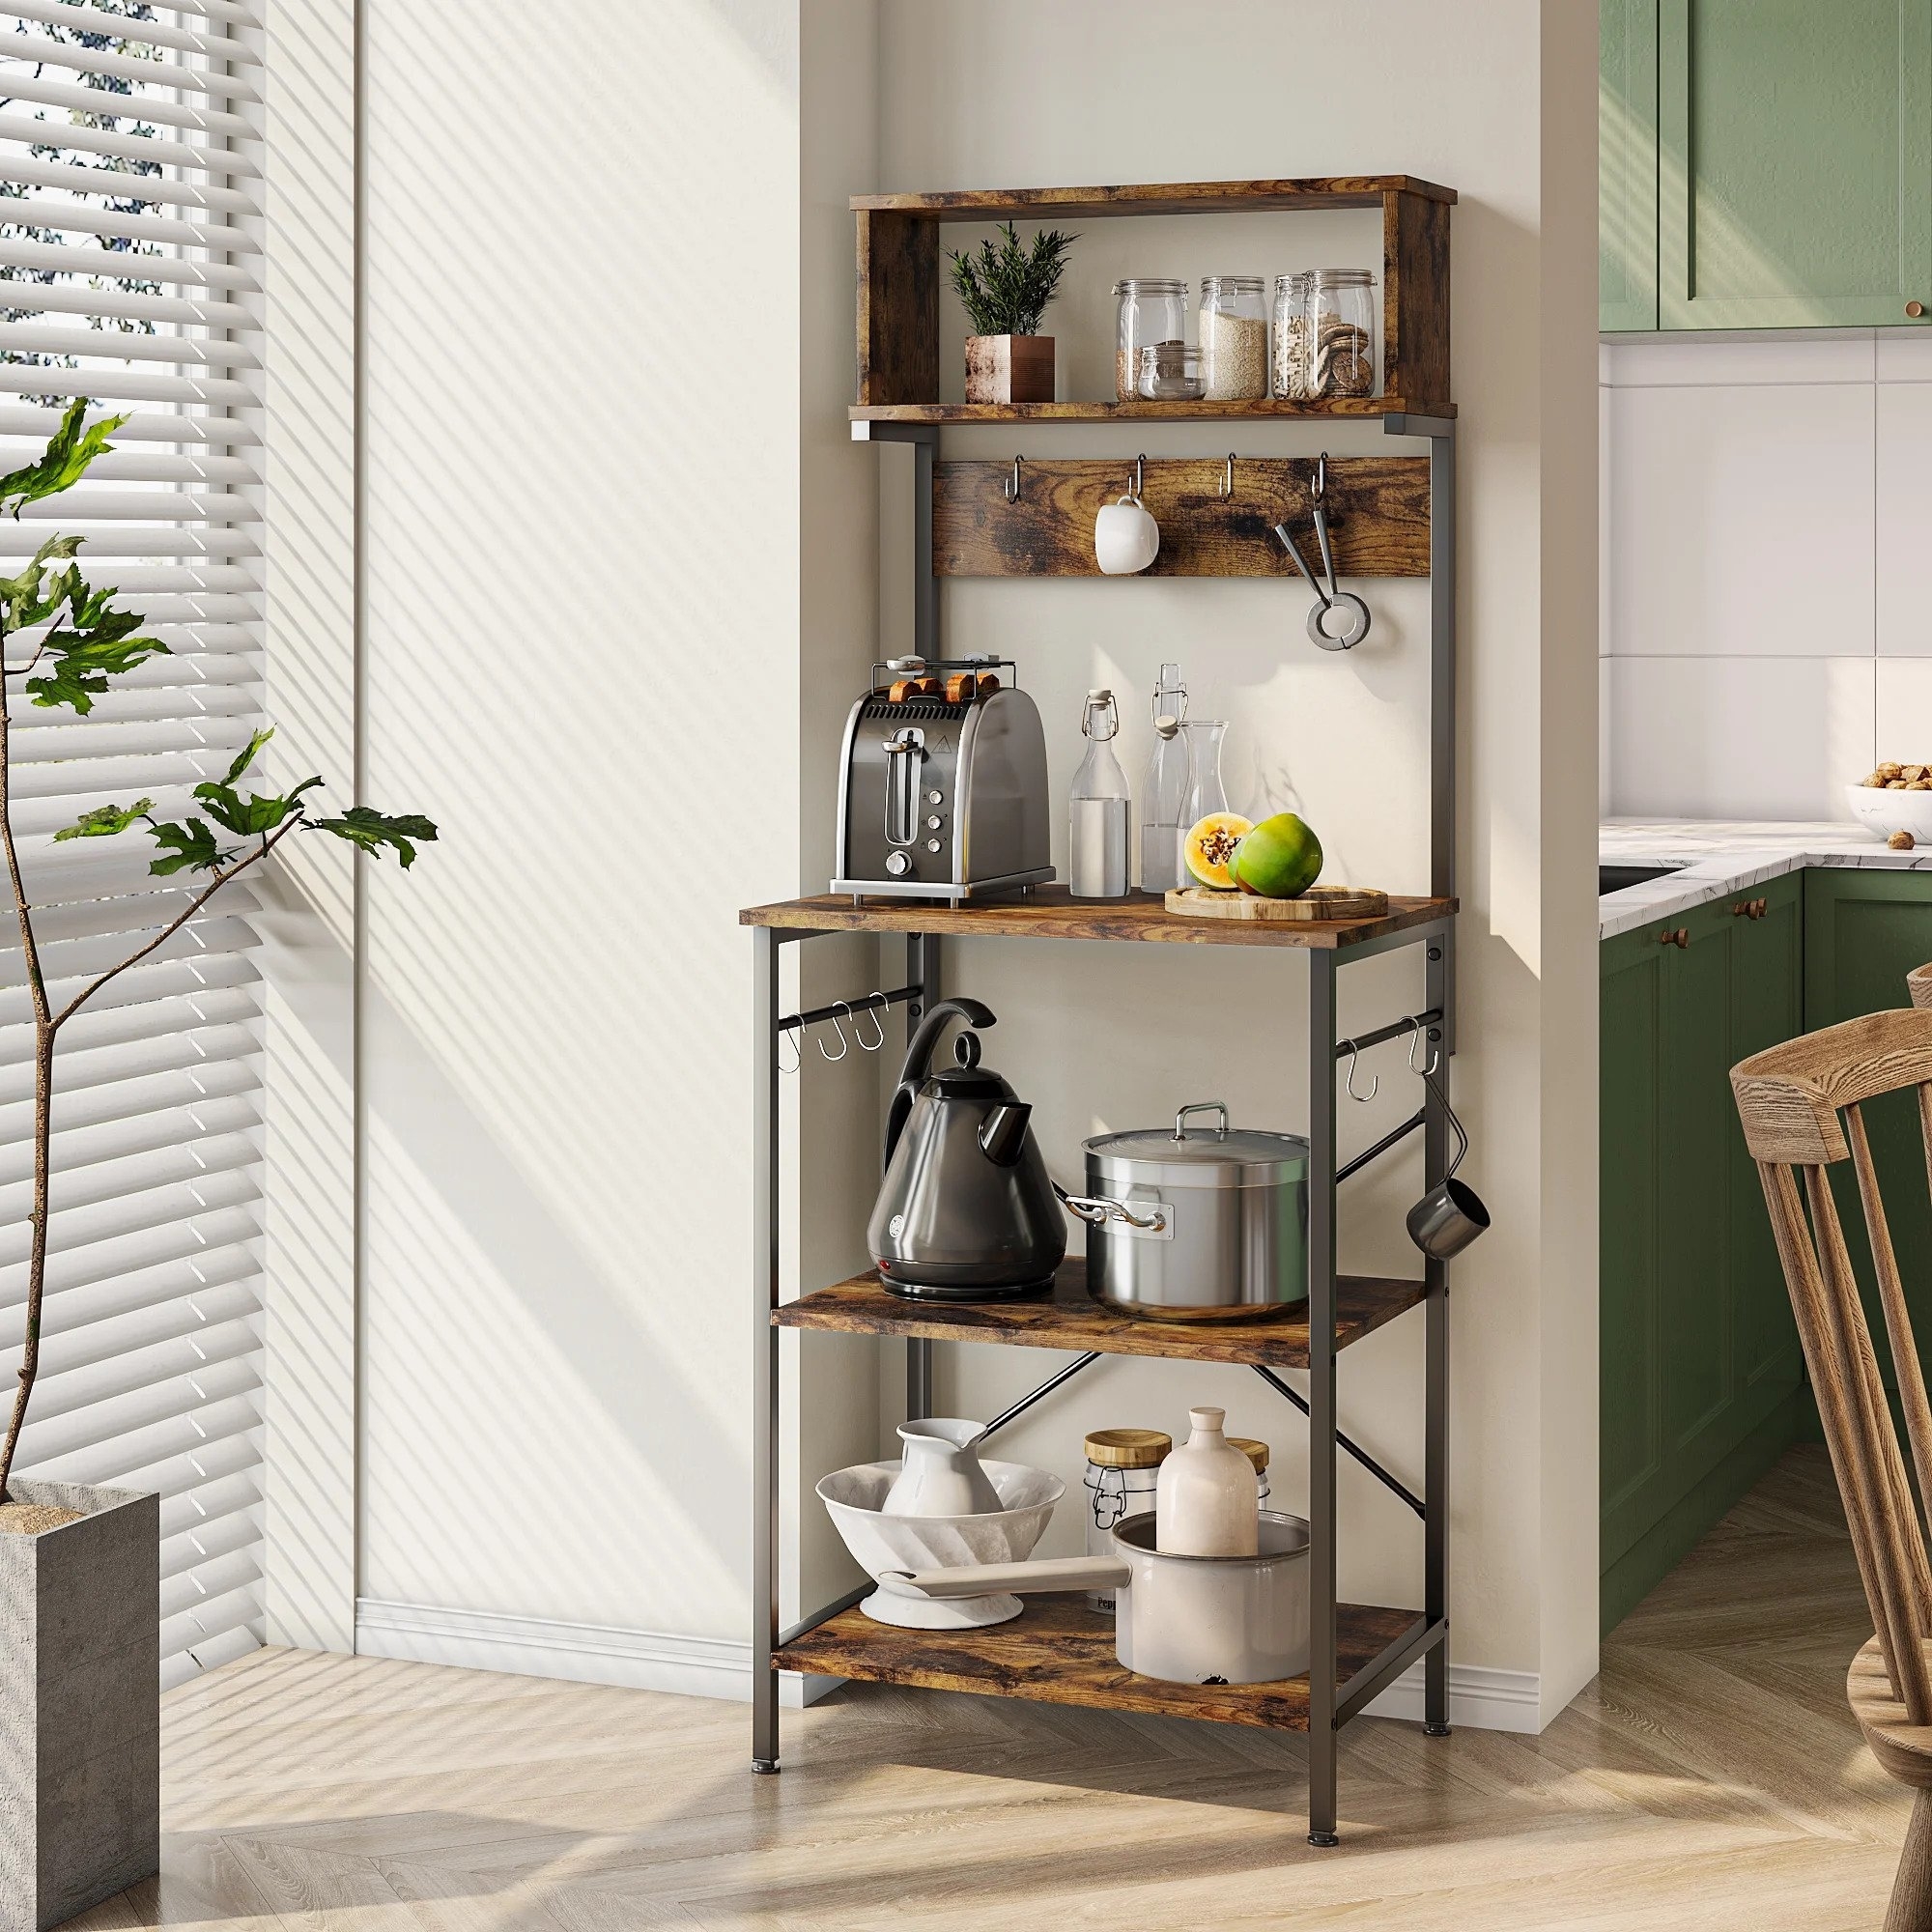 The baker&#x27;s rack with two bottom shelves, one upper shelf, and hooks on the side in a brown wood finish